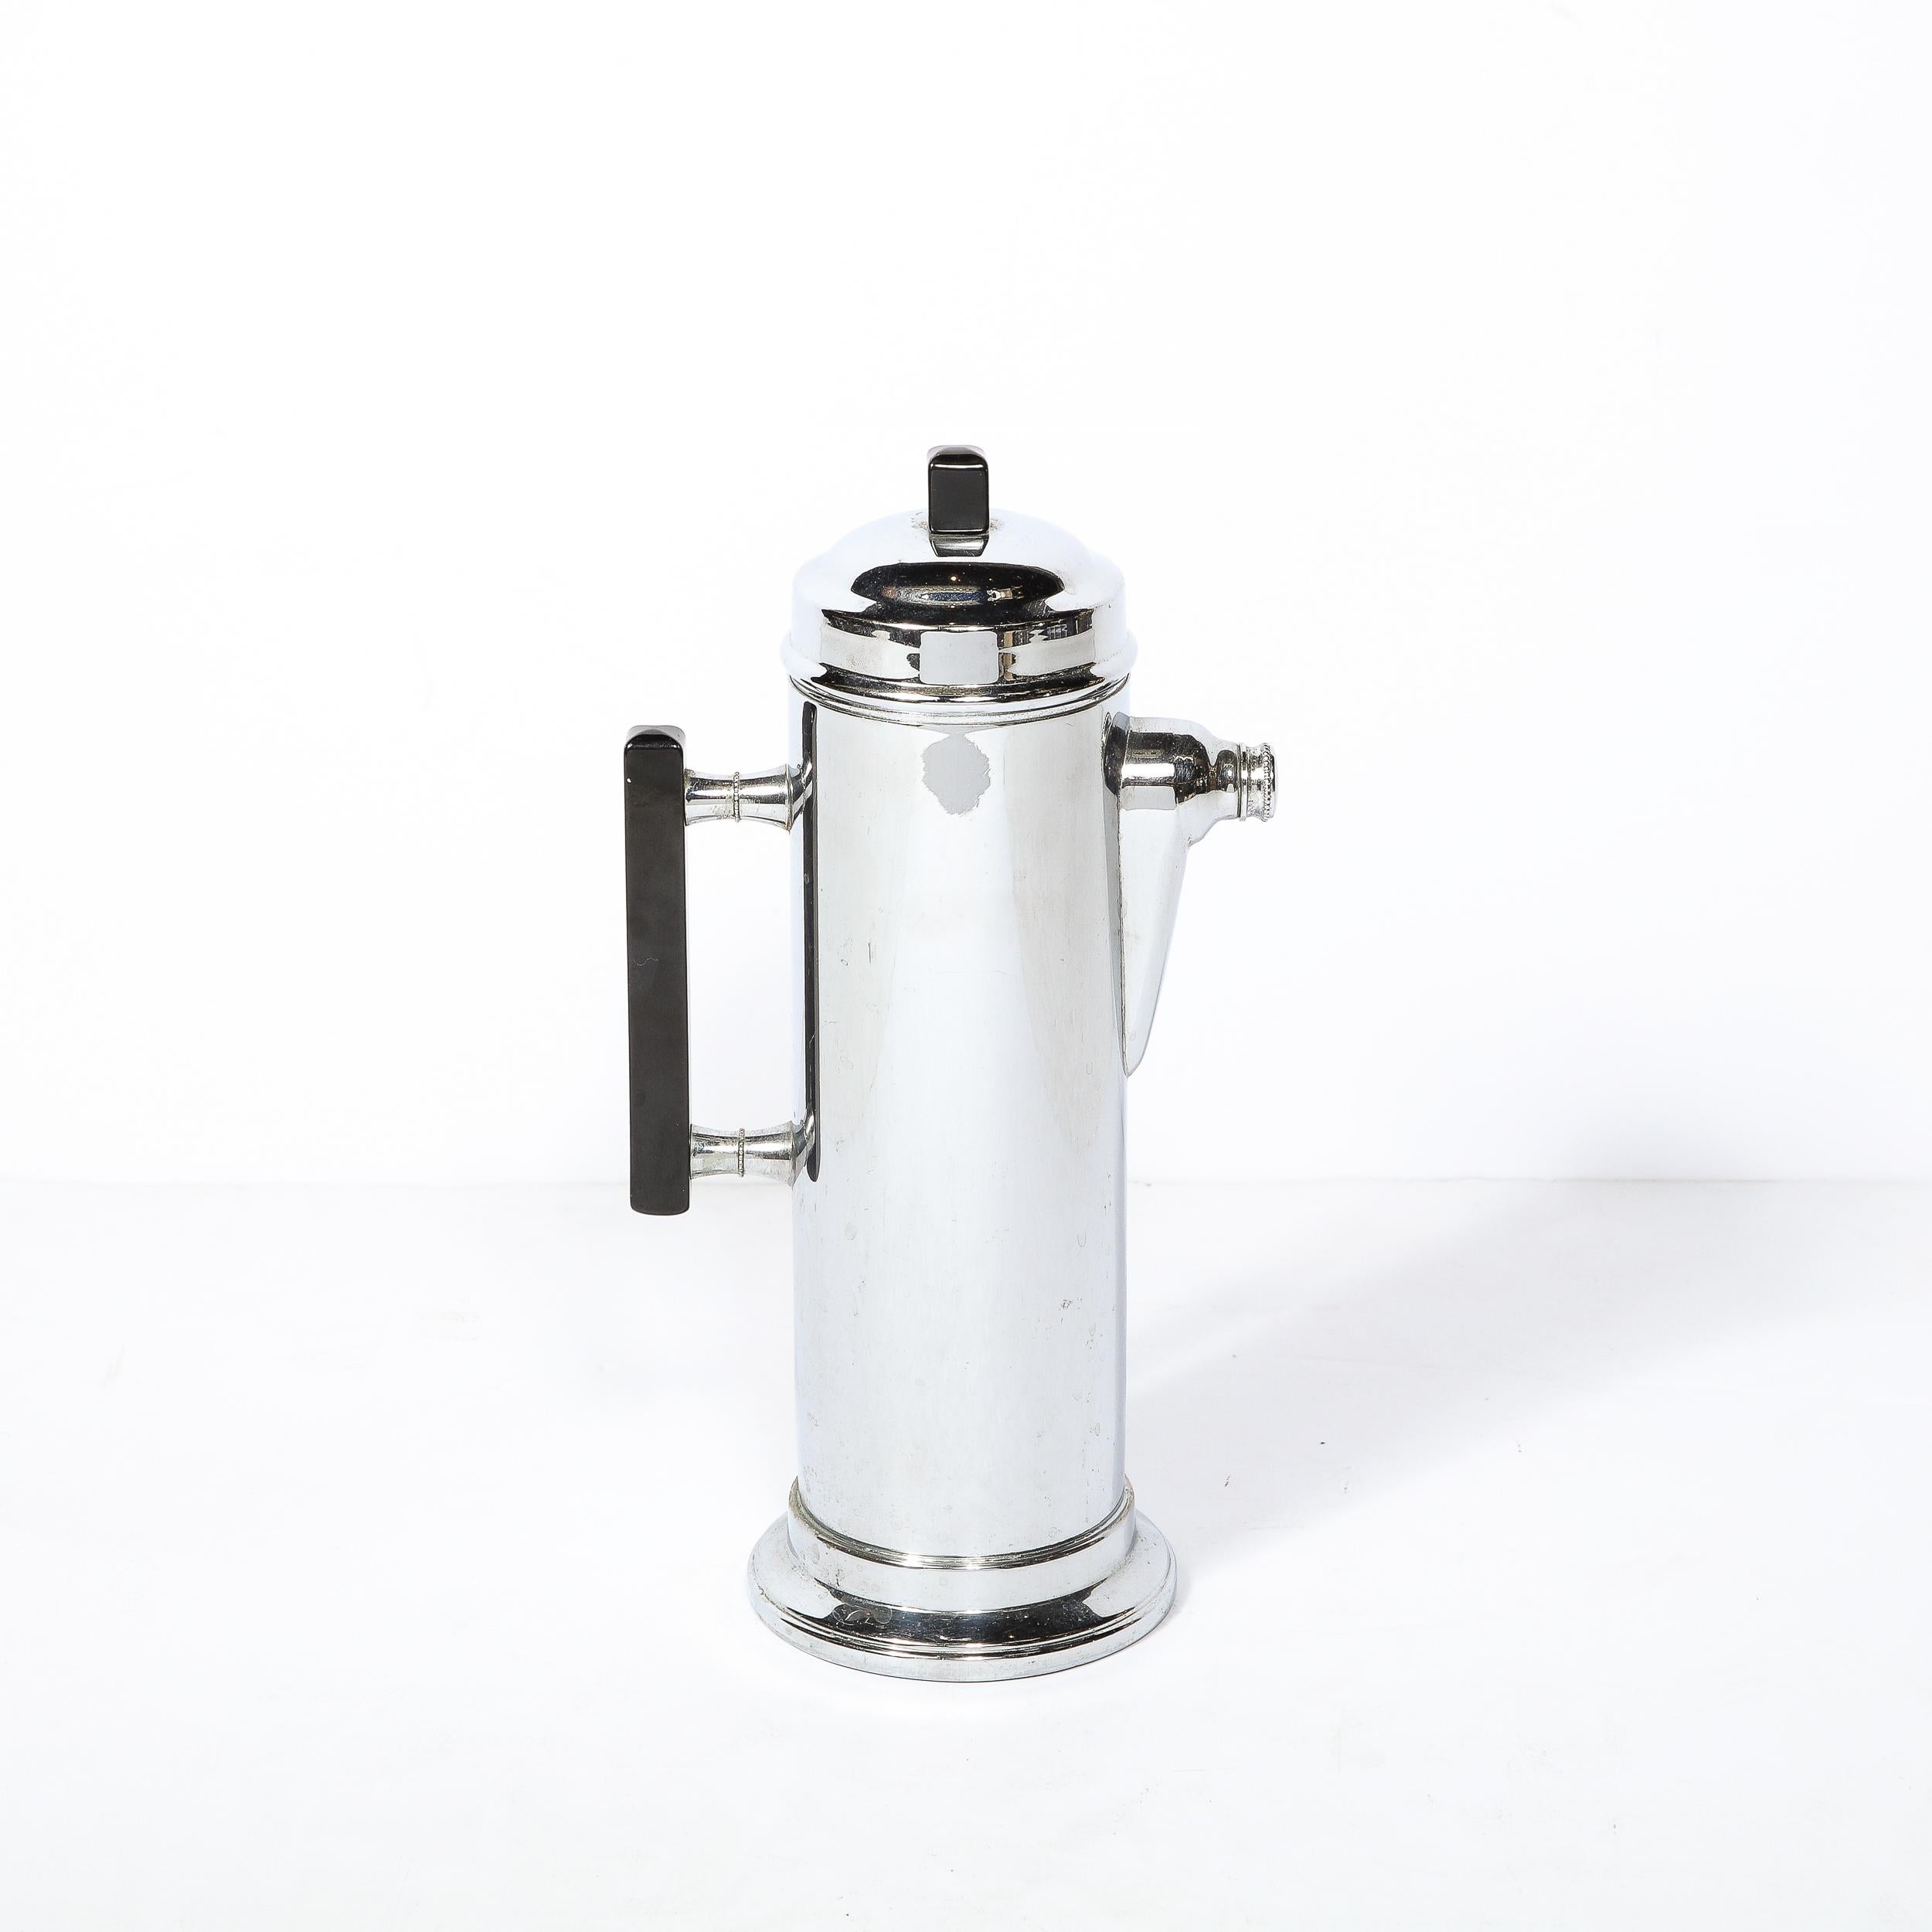 This Art Deco Streamlined Cocktail Shaker in Chrome is an excellent example of streamline design and materials from the era. The piece is rendered in a gorgeous polished chrome and precisely machined Black Bakelite. The Mouth of the Server is capped